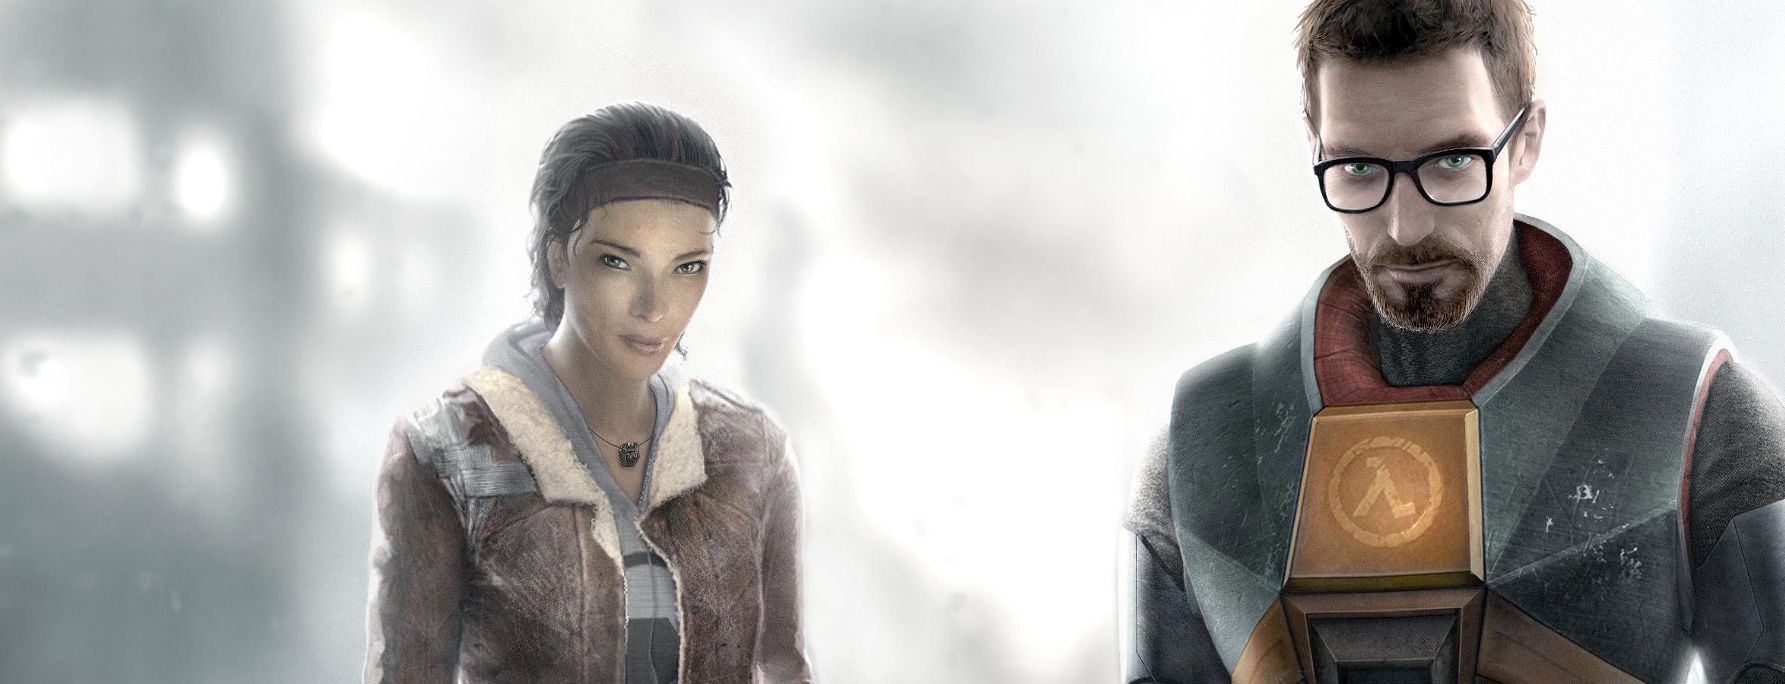 Gordon Freeman & Alyx Vance - Most Iconic Video Game Duos of All Time